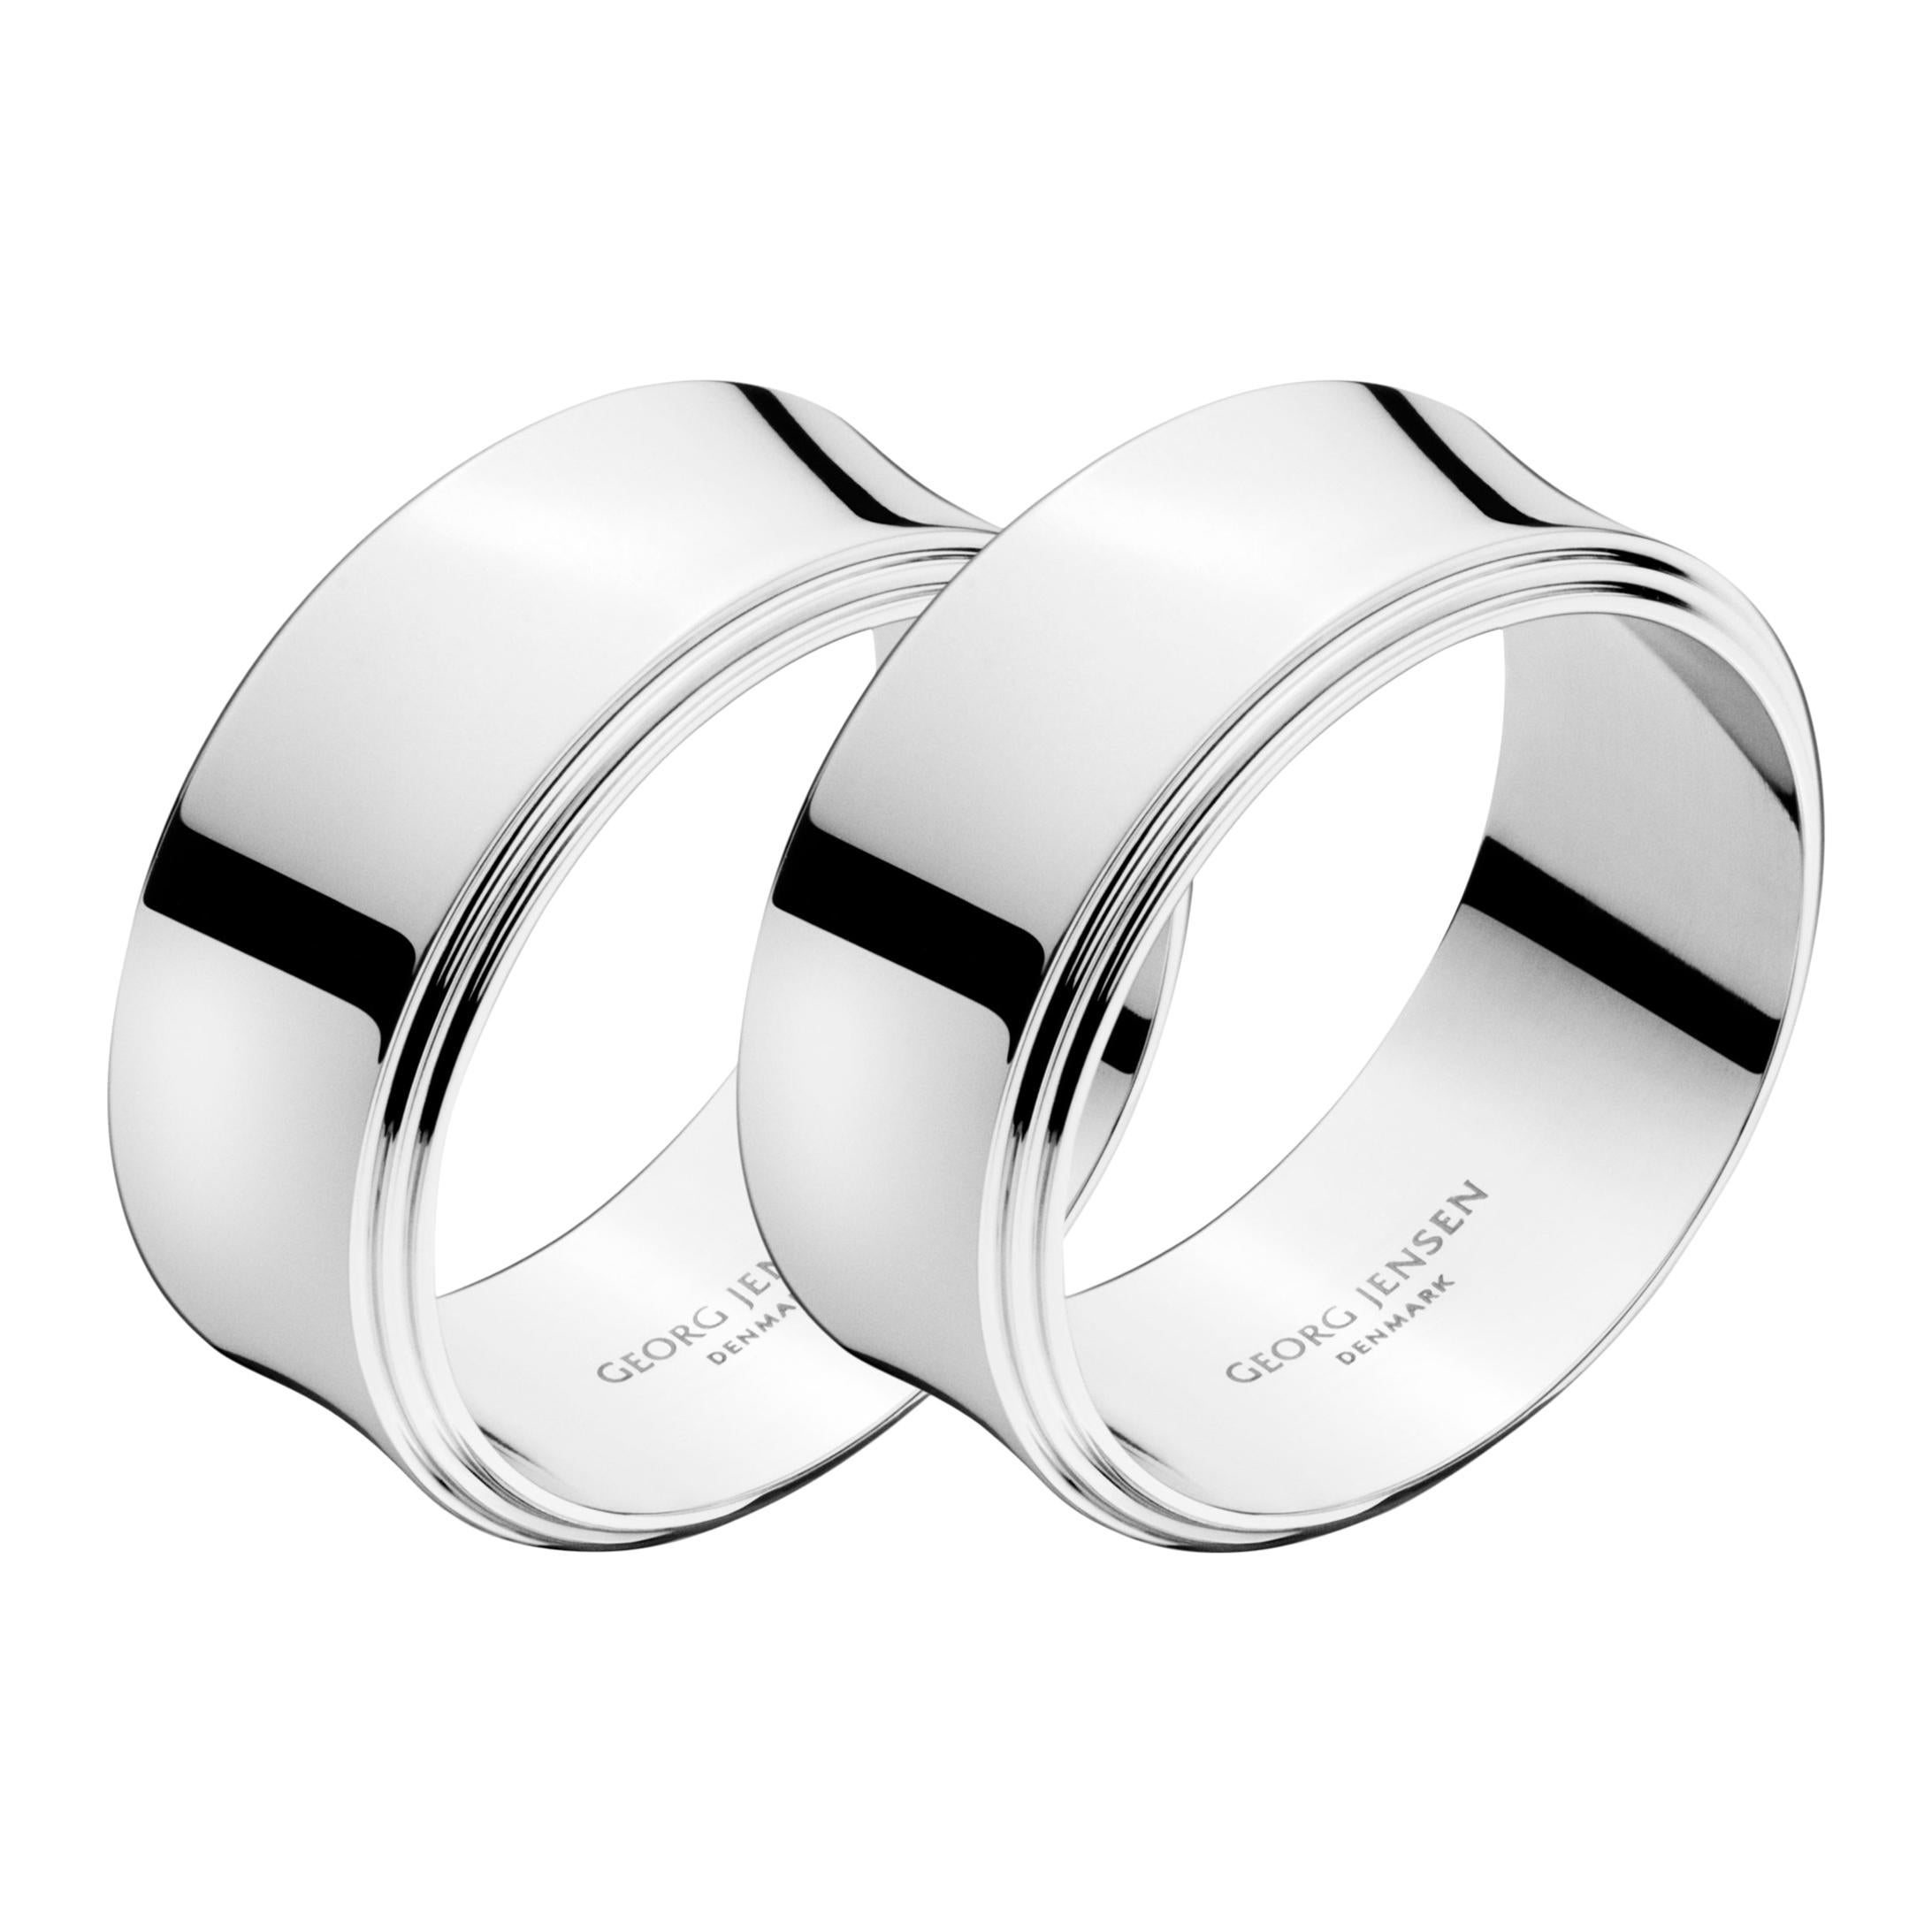 Georg Jensen Pyramid  2-Piece Napkin Ring Stainless Steel Set by Harald Nielsen For Sale